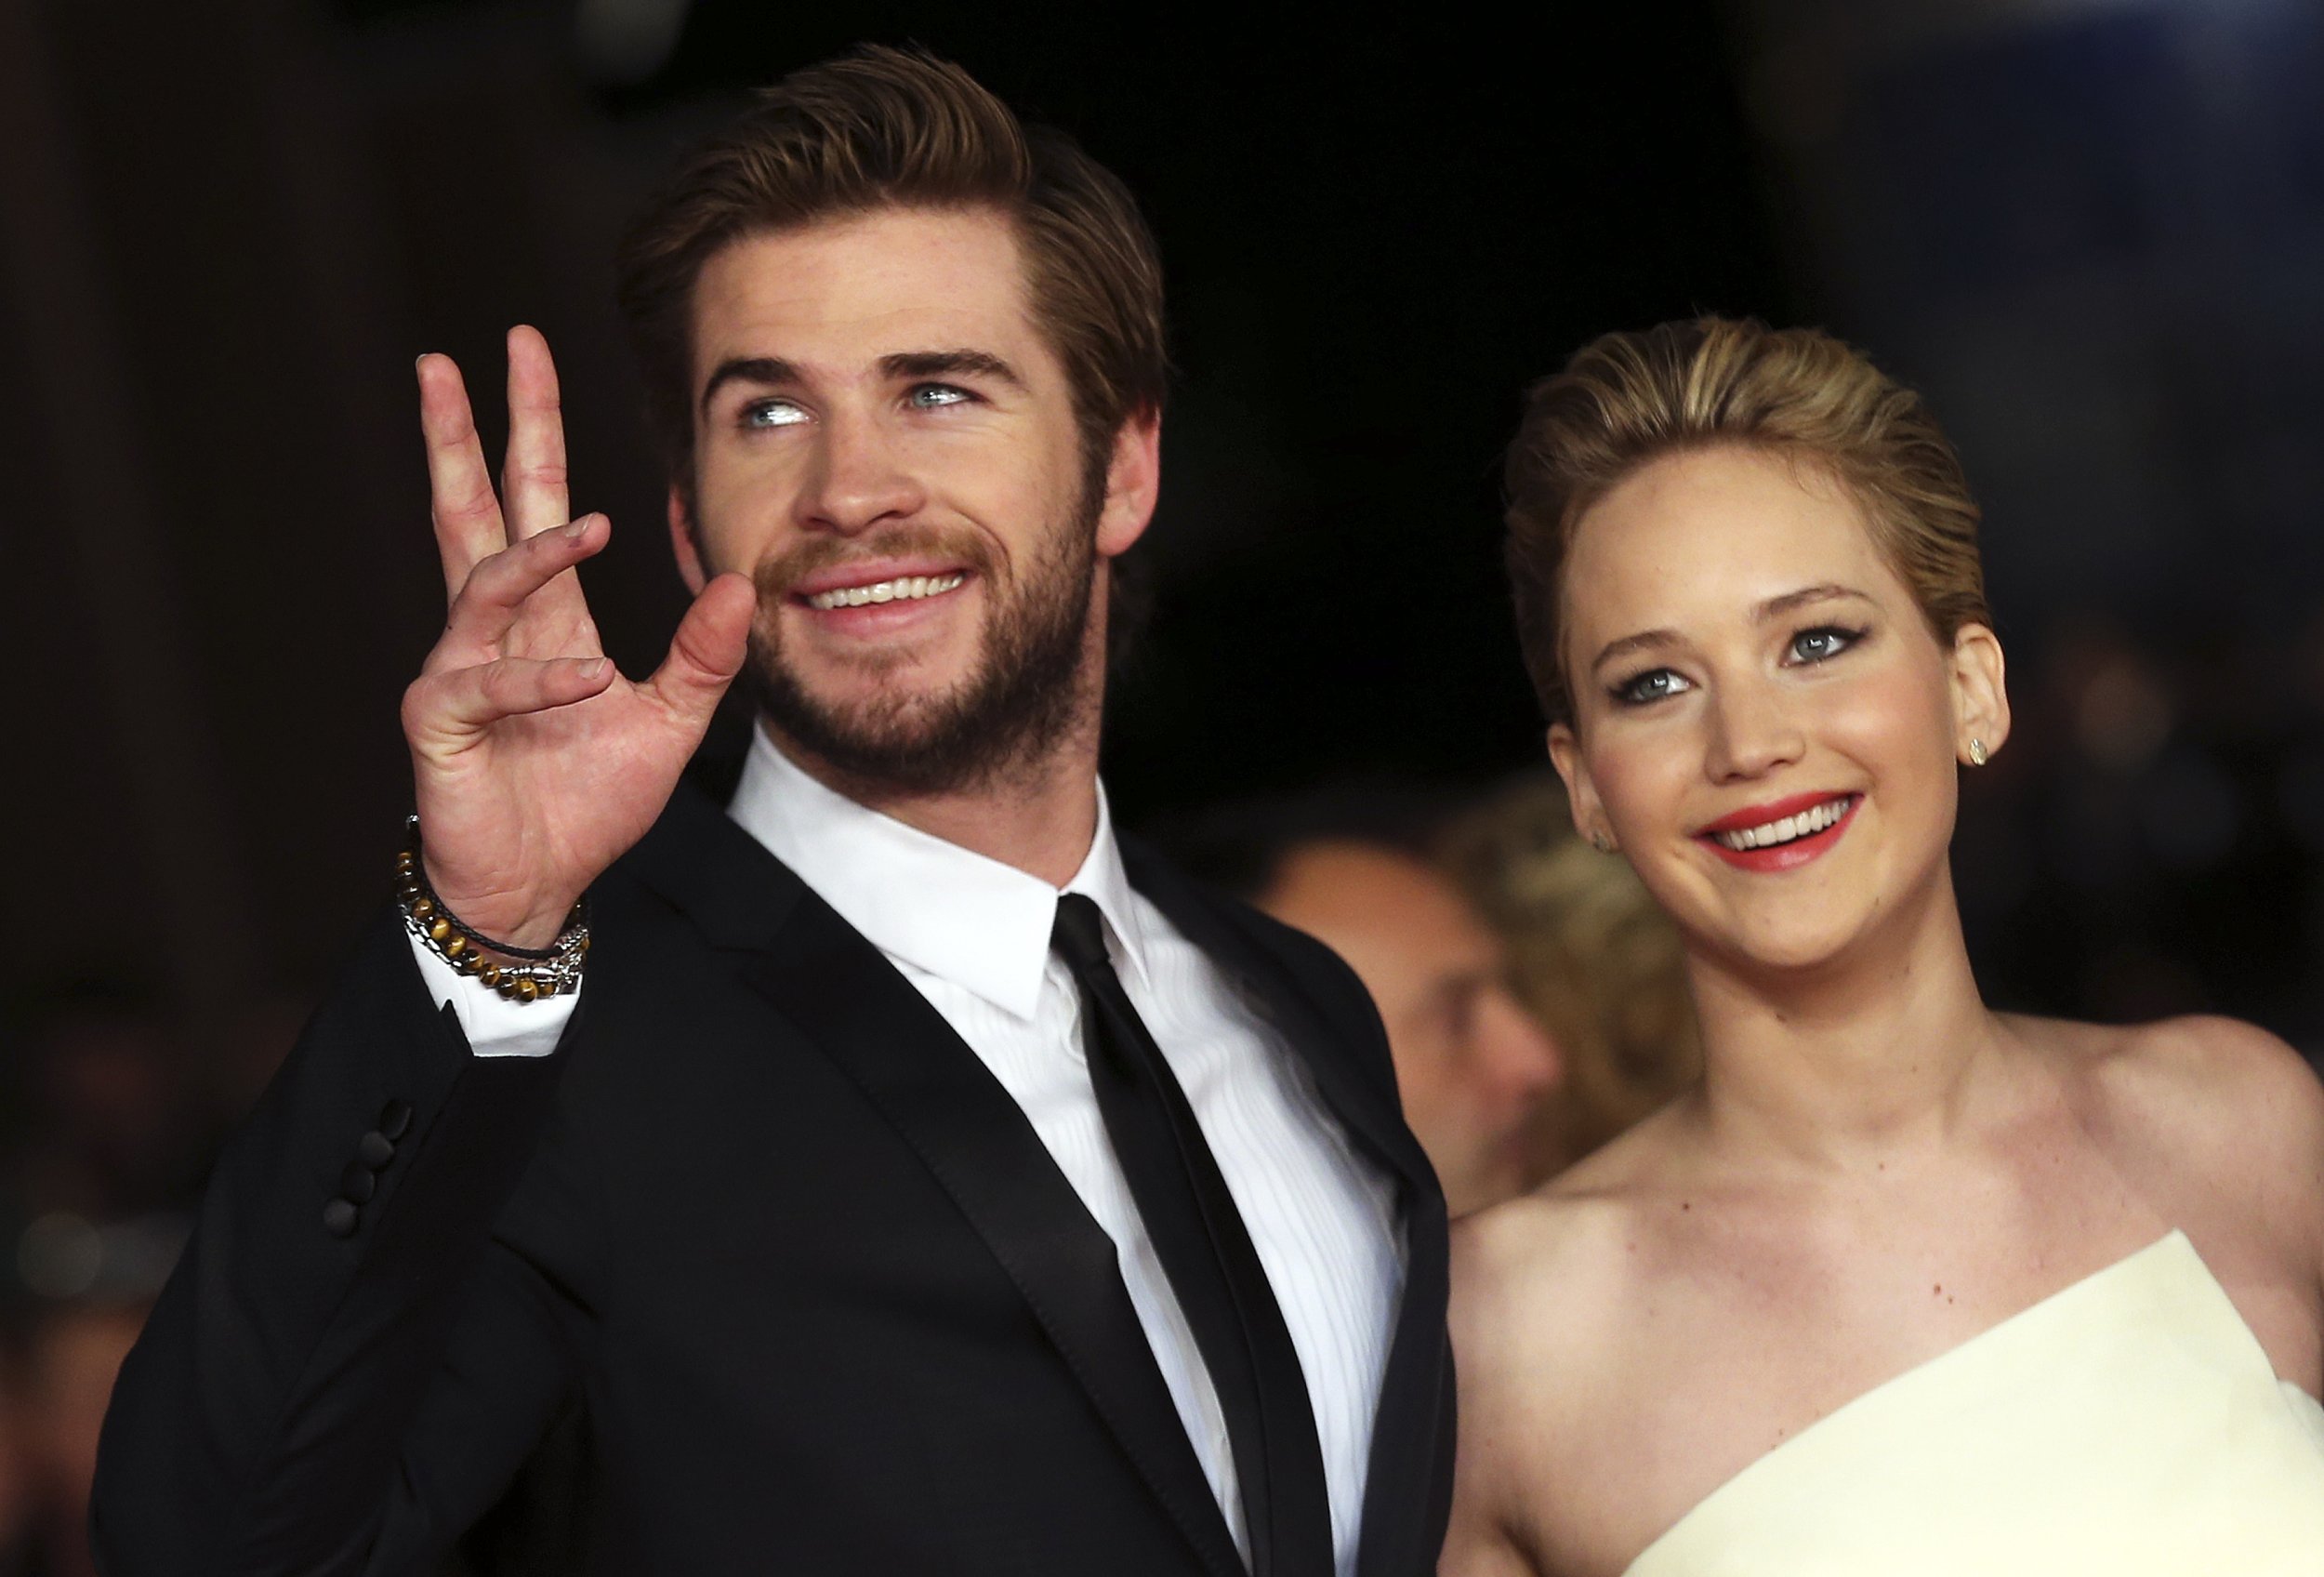 Catching Fire' Drama: Liam Hemsworth Says He's Happier Single With Jennifer Lawrence Than Dating Miley Cyrus | IBTimes